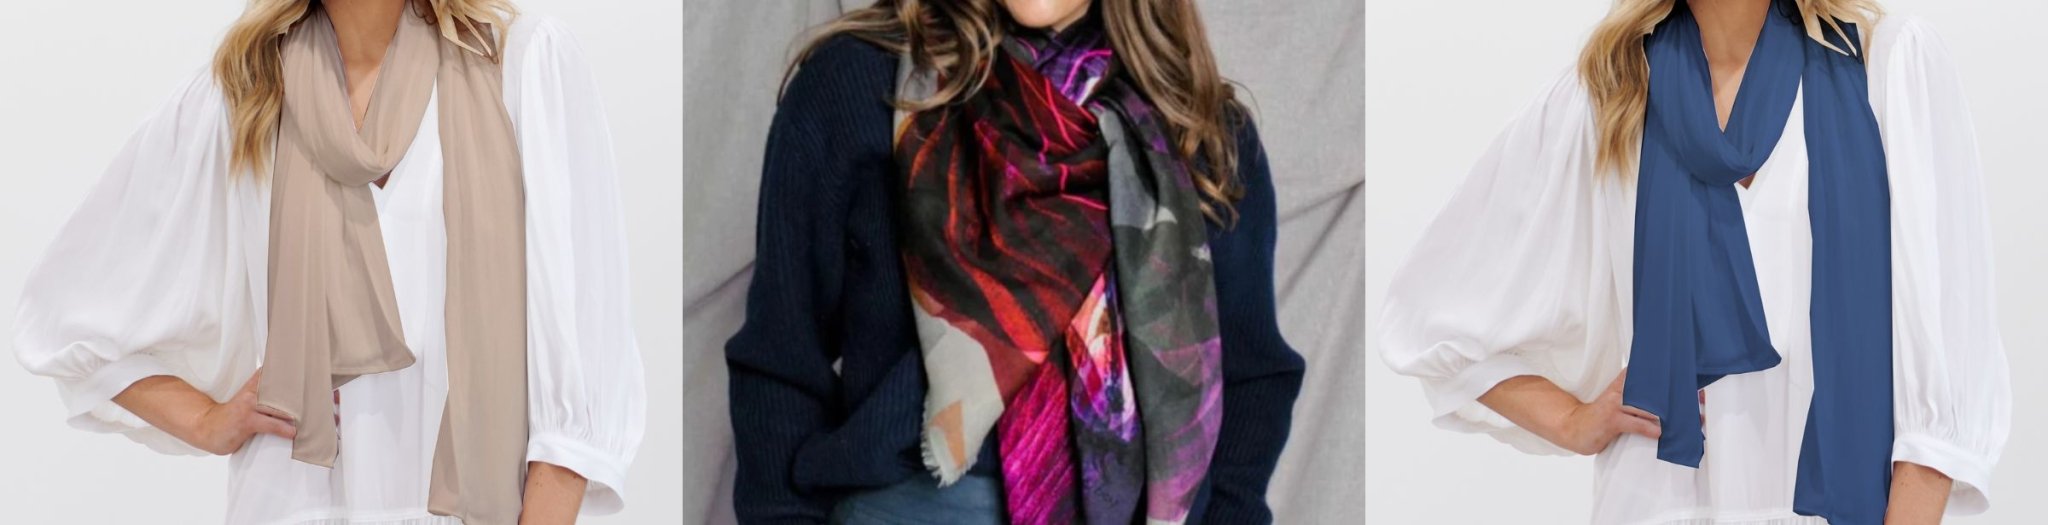 Scarves - OBriens Clothing Co